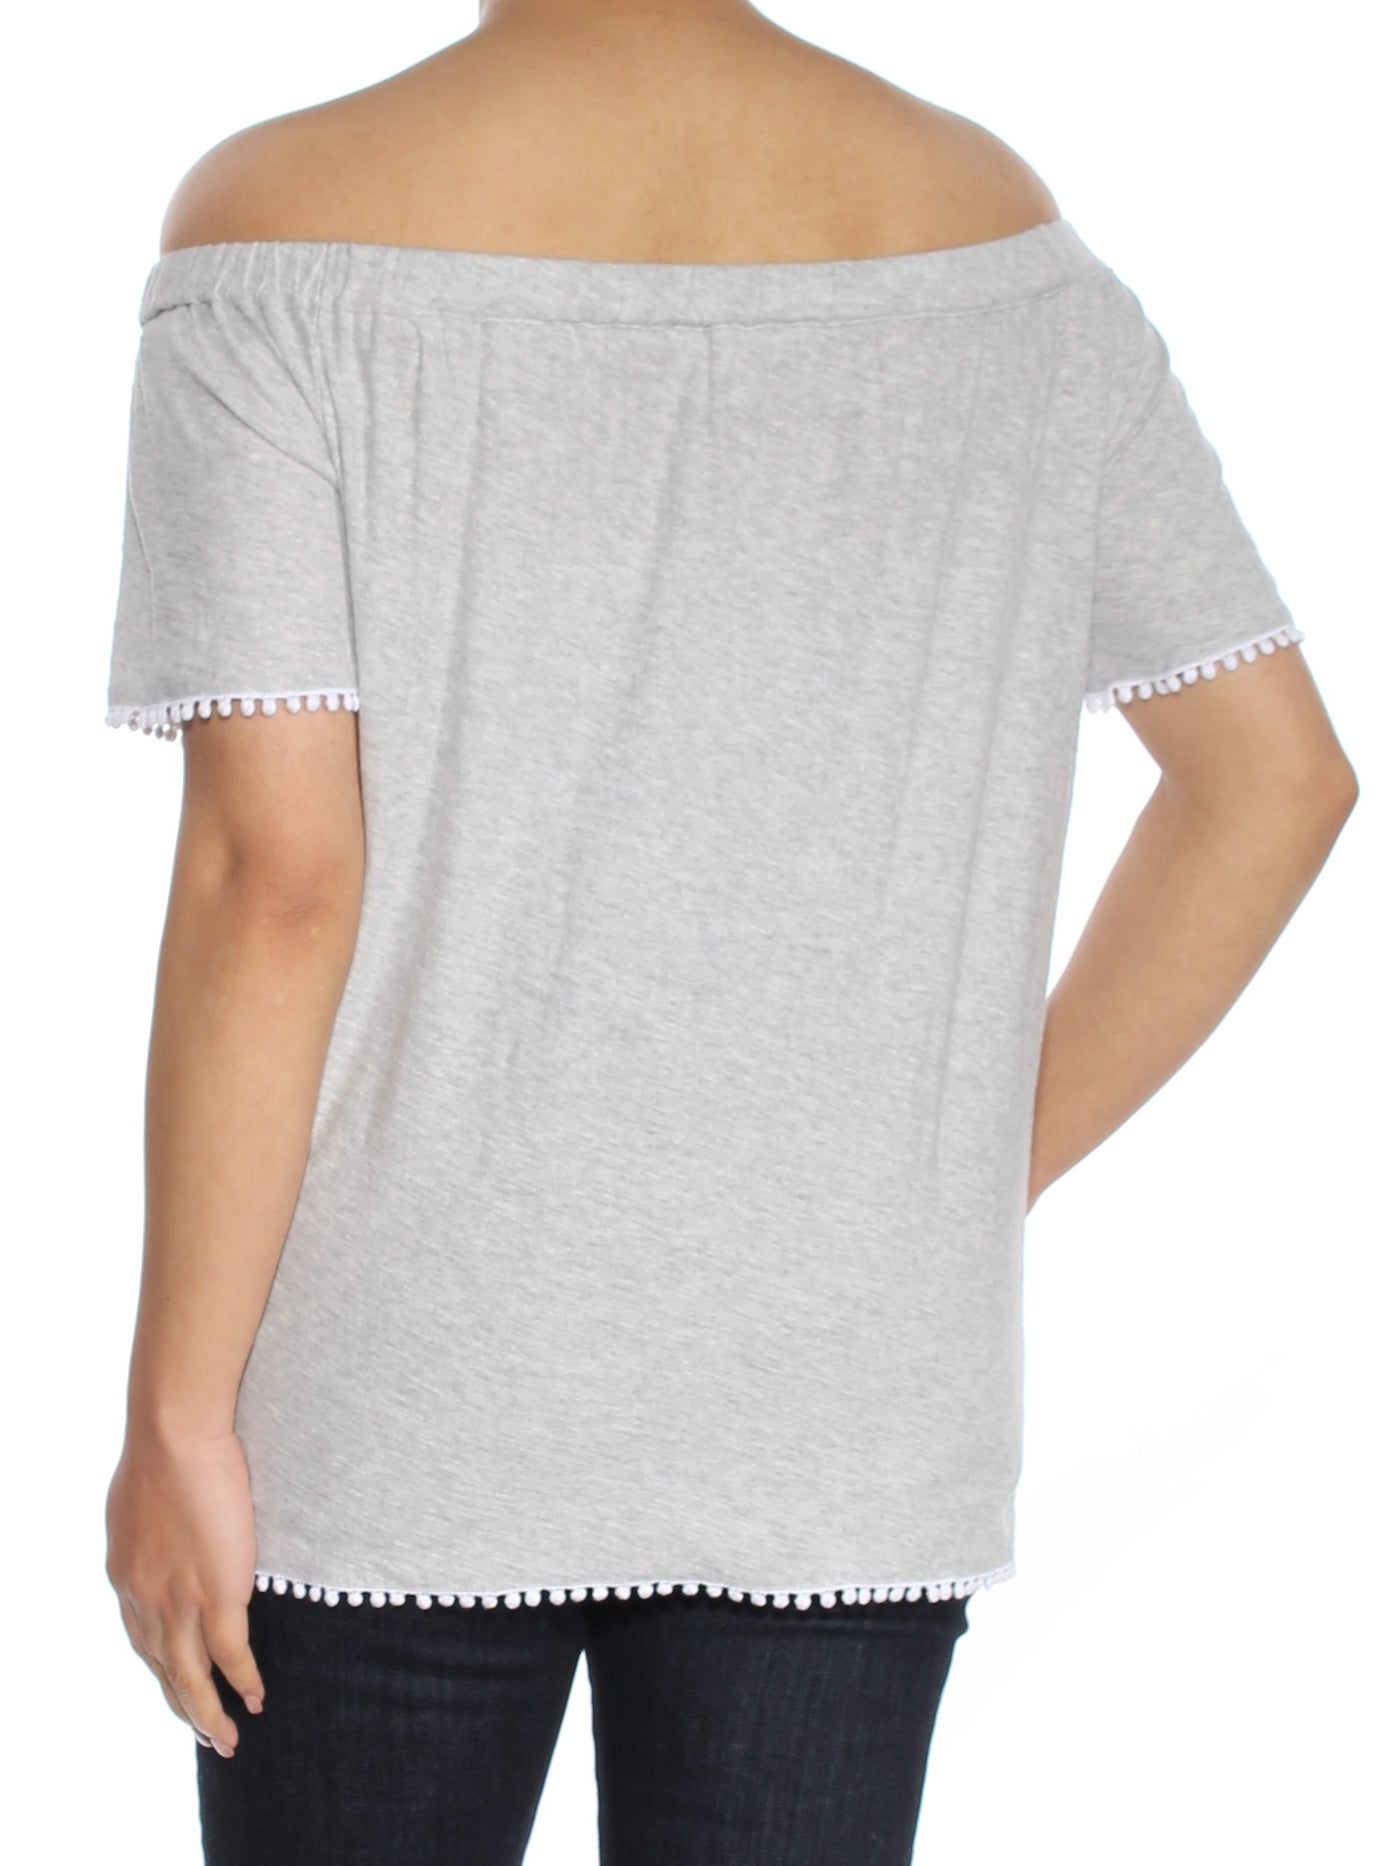 VINCE CAMUTO Womens Gray Short Sleeve Off Shoulder Top